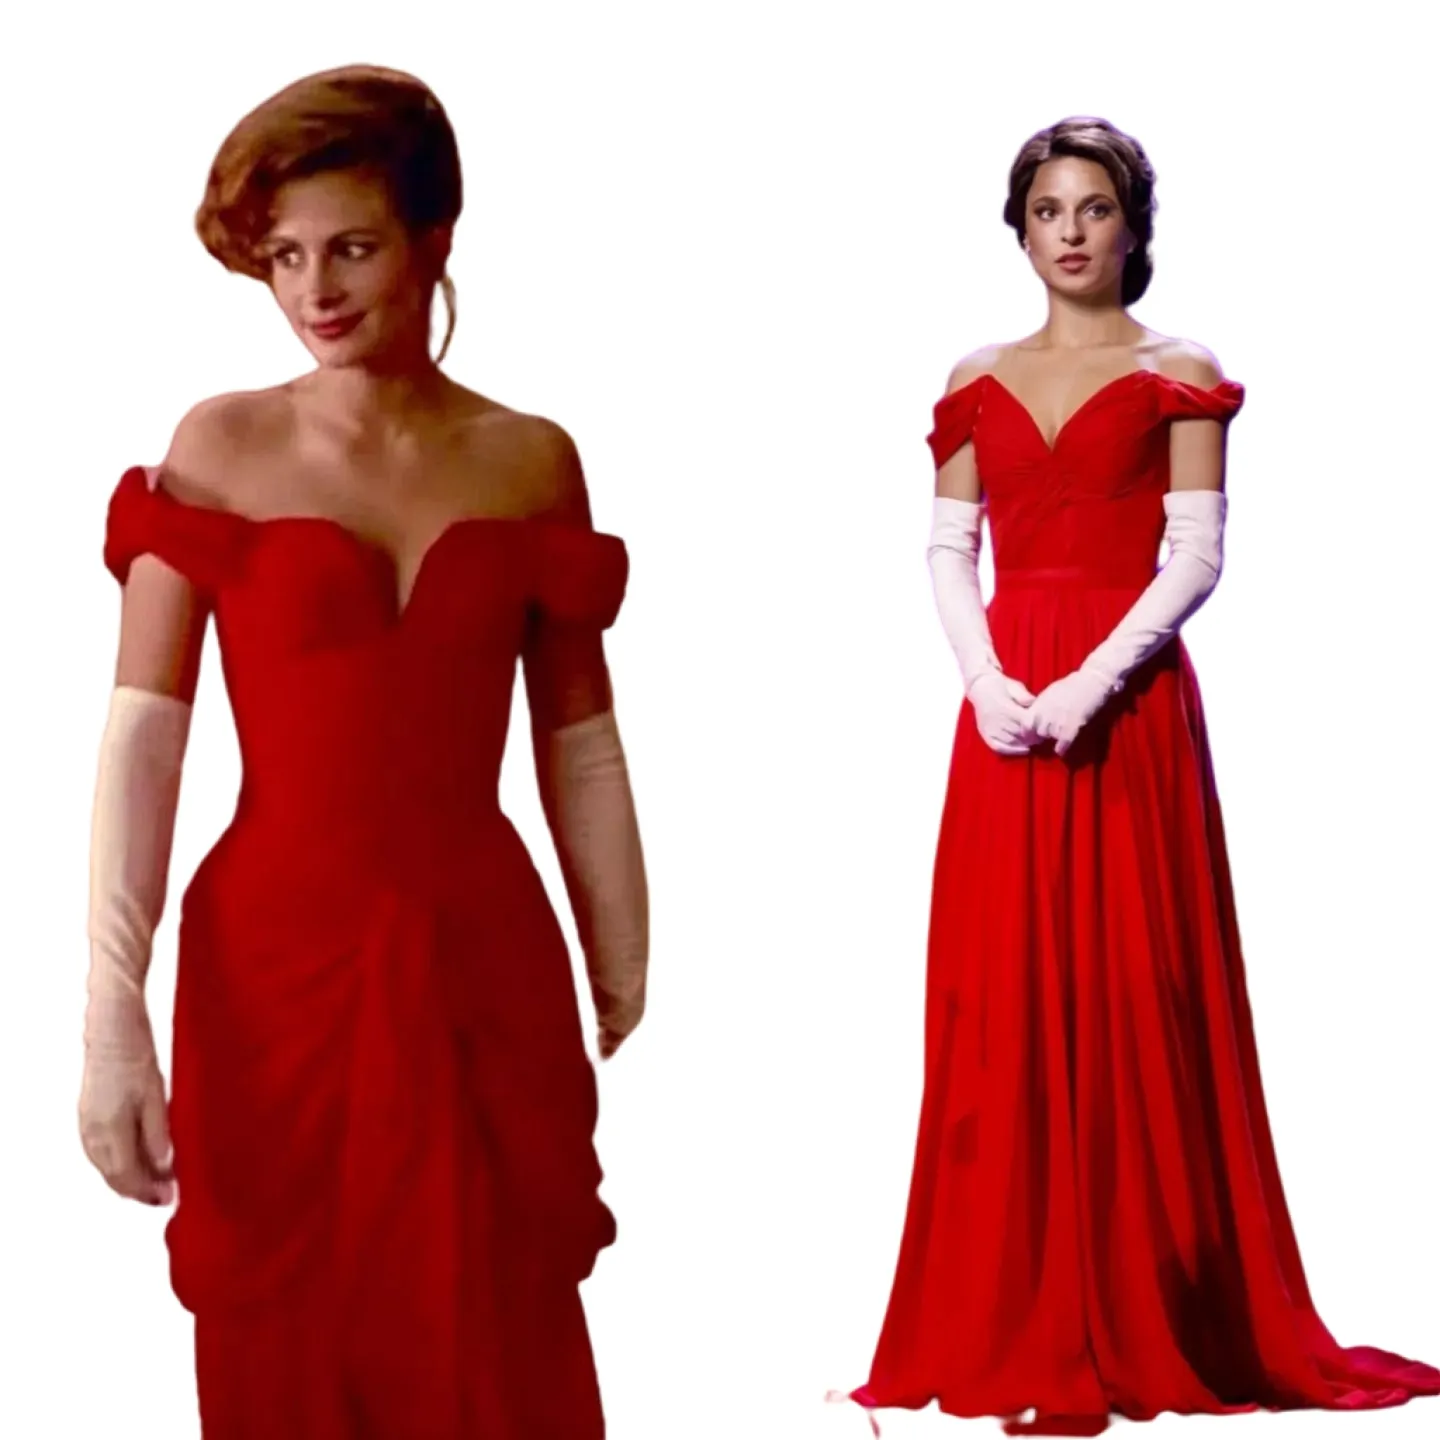 Hollywood's Most Iconic Fashion Moments | Entertainment | Pretty woman red  dress, Pretty women dresses, Pretty woman movie